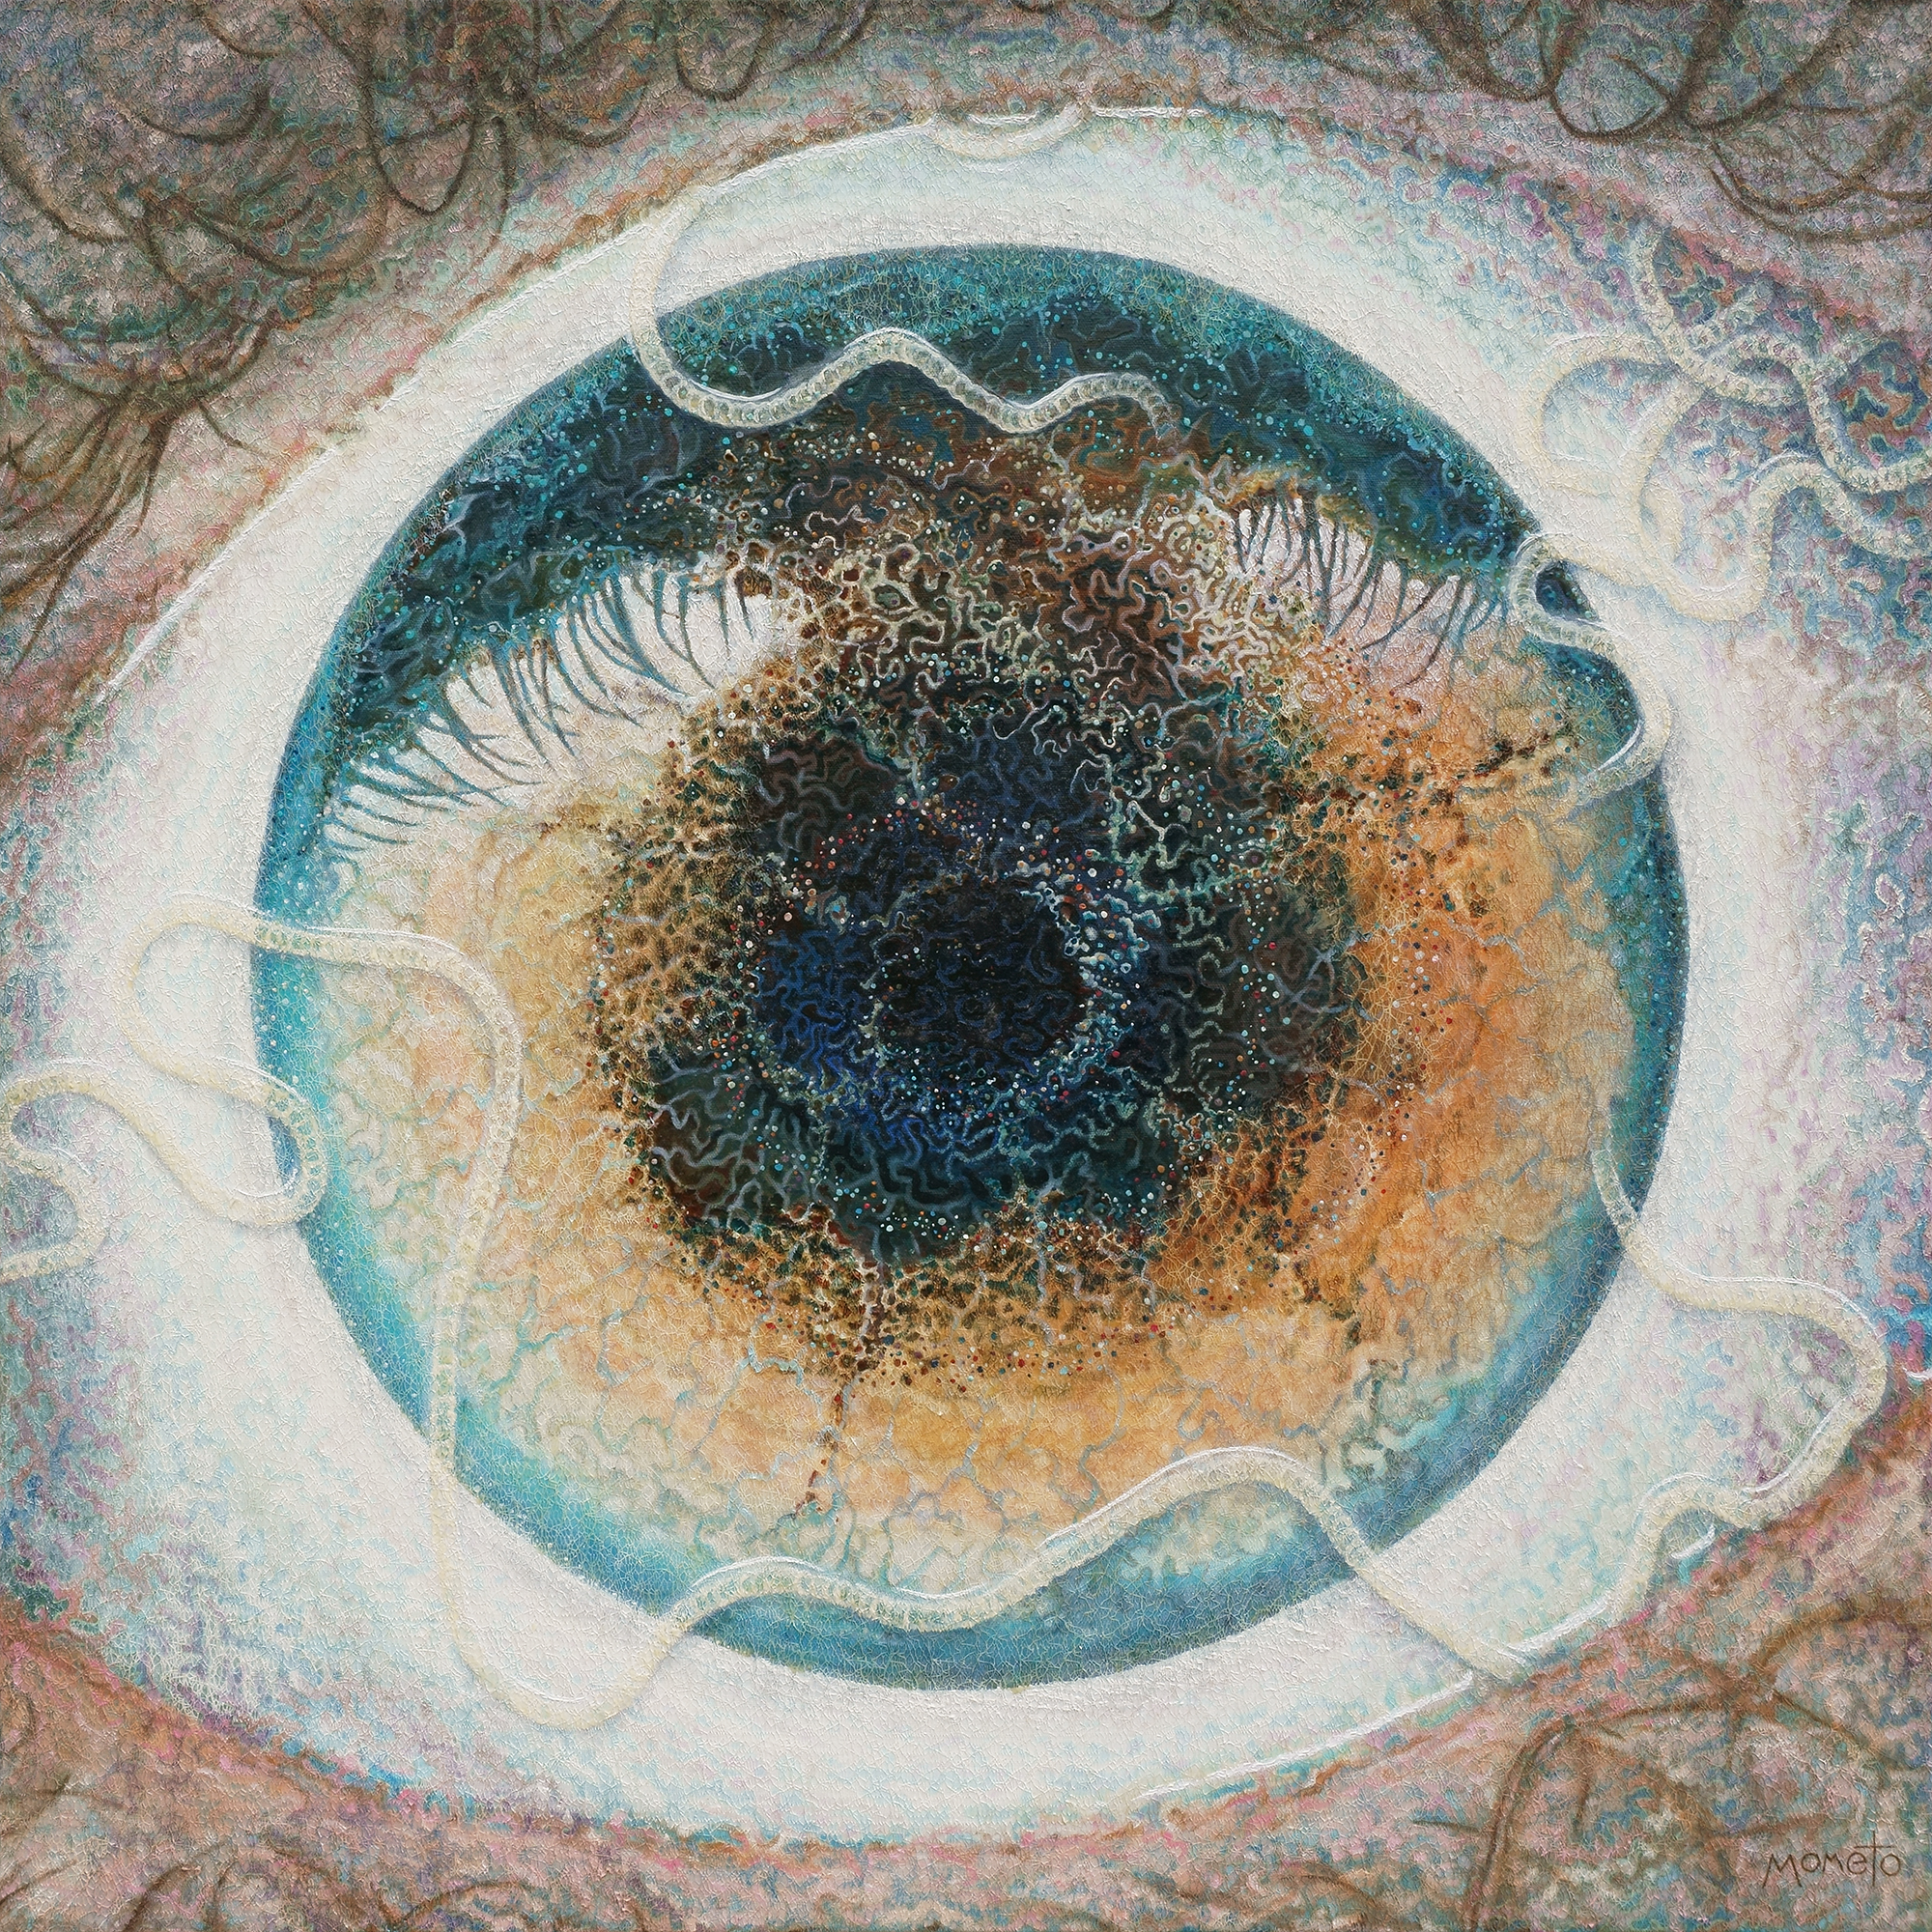 An Artist Discovered a Parasitic Worm in His Eye, Which He Said